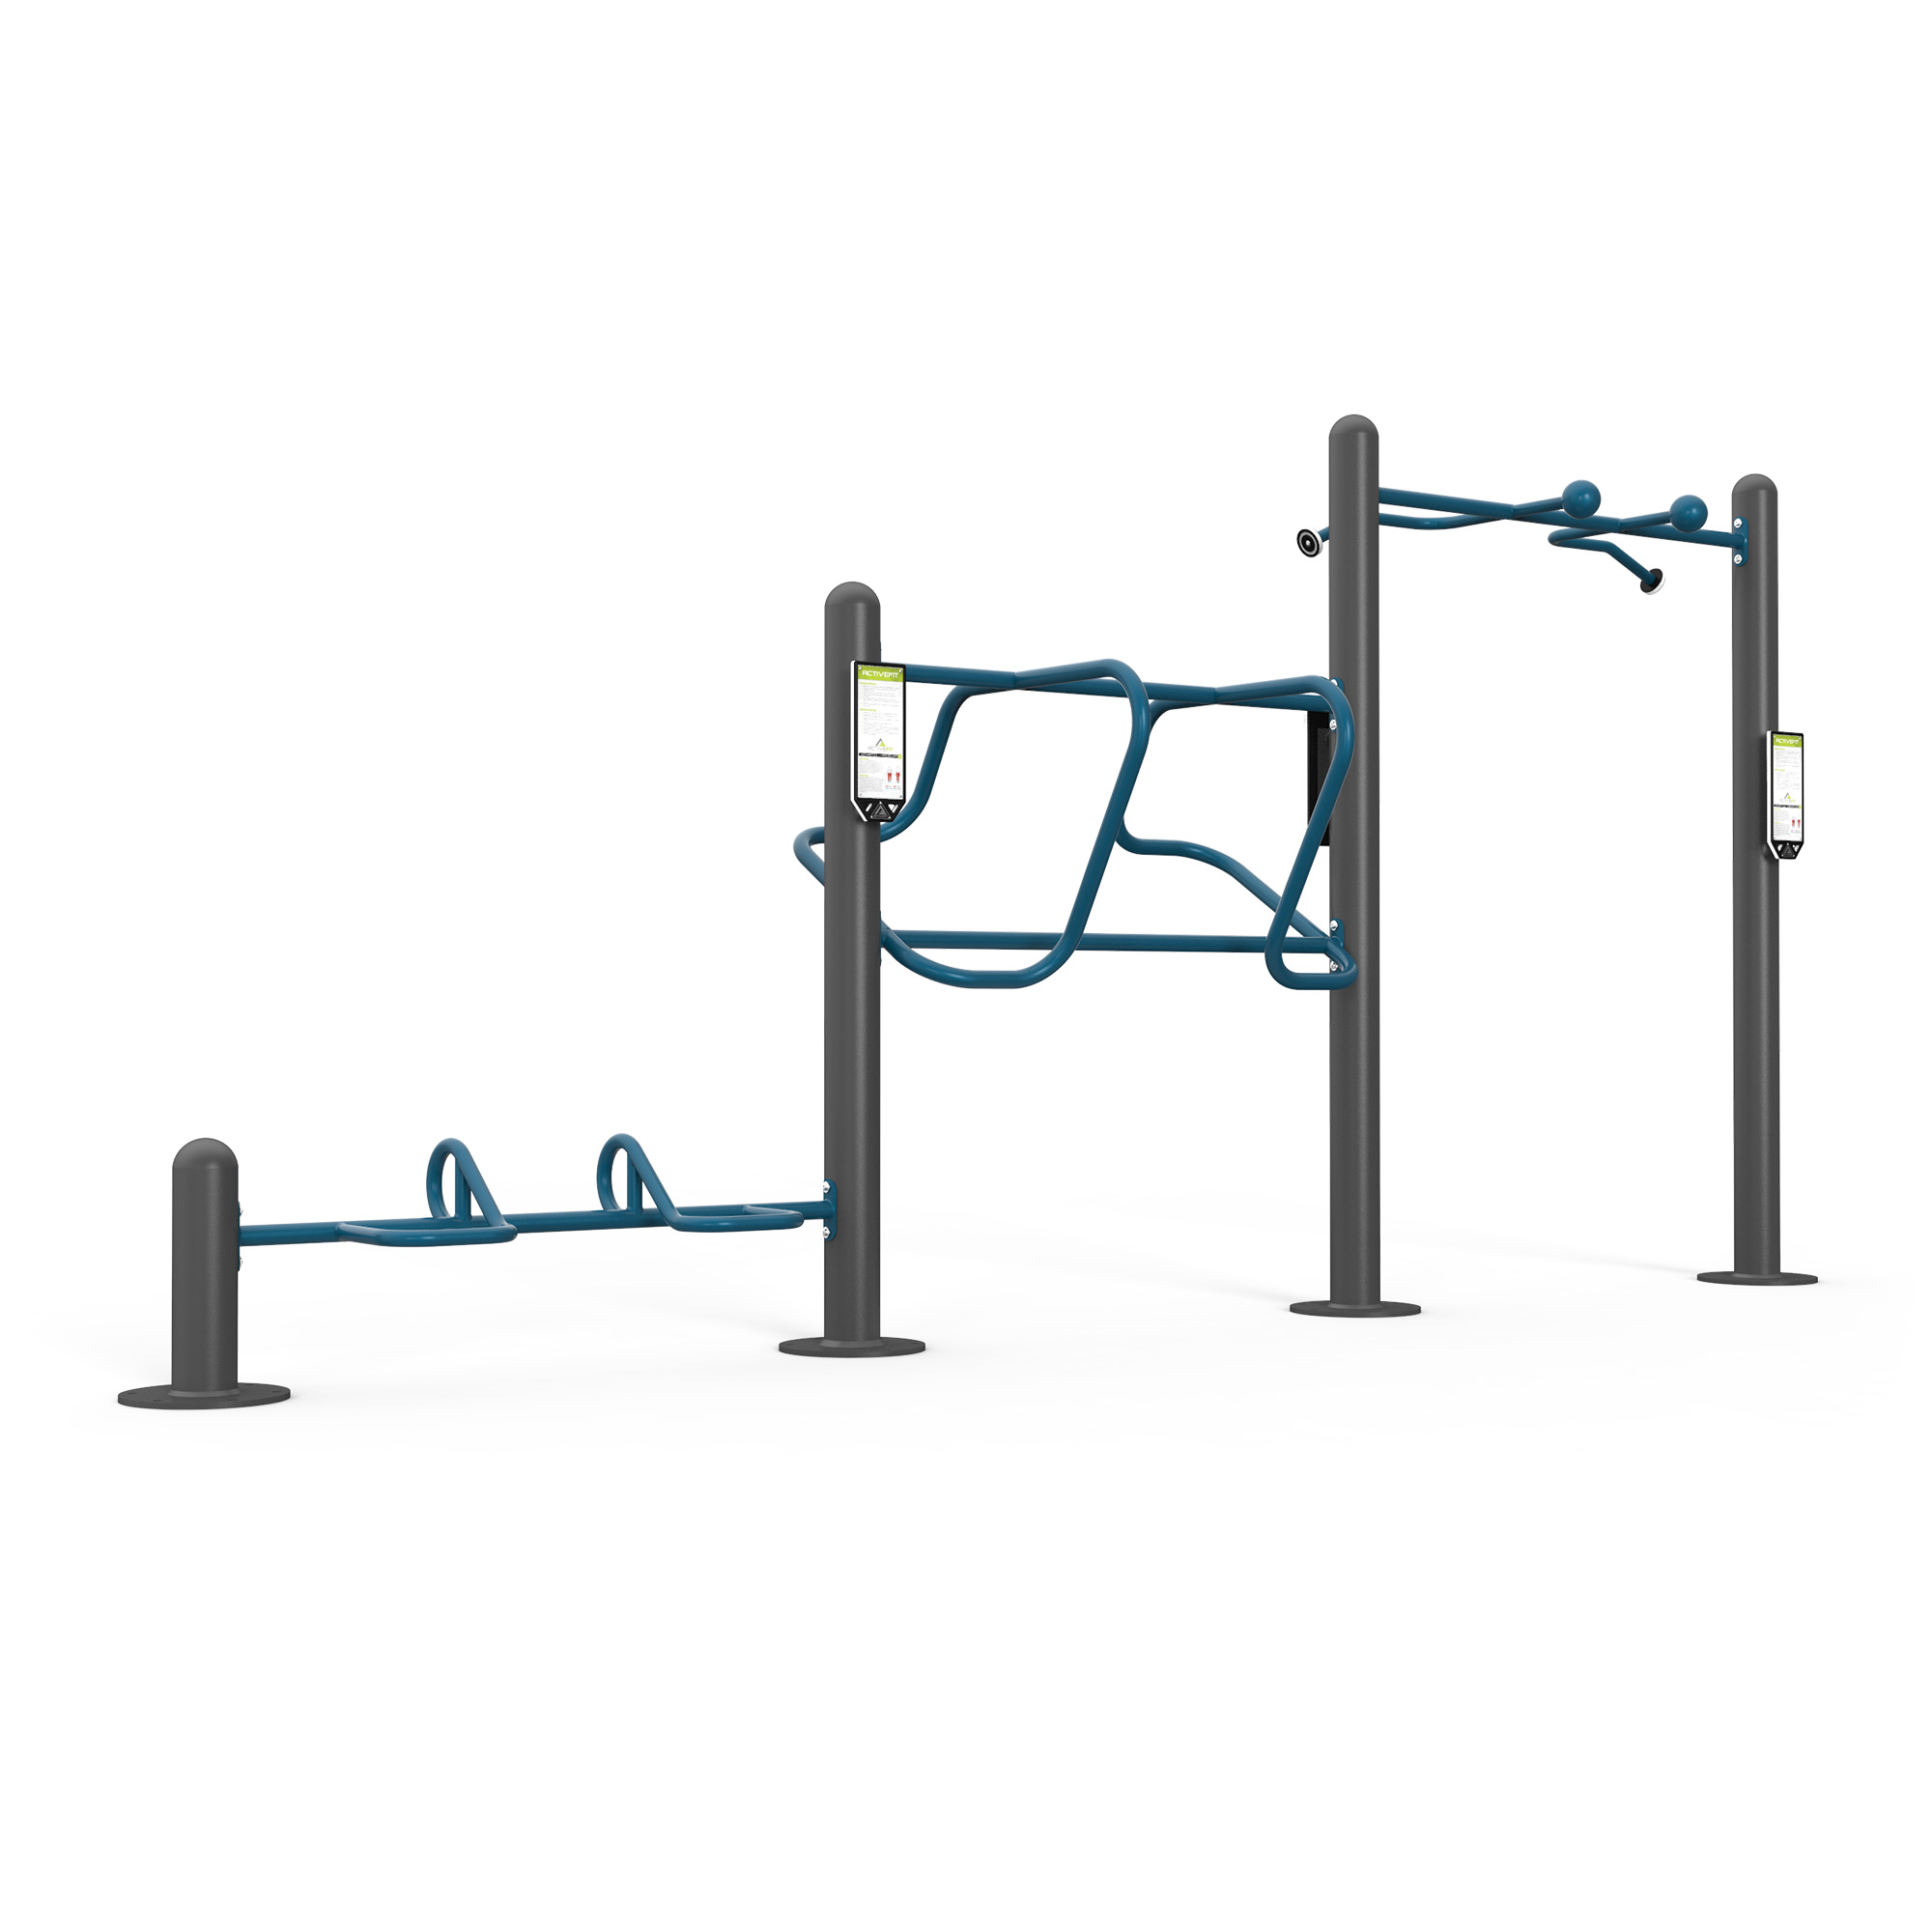 ActiveFit FIT-000020-pushup-pullup-dip